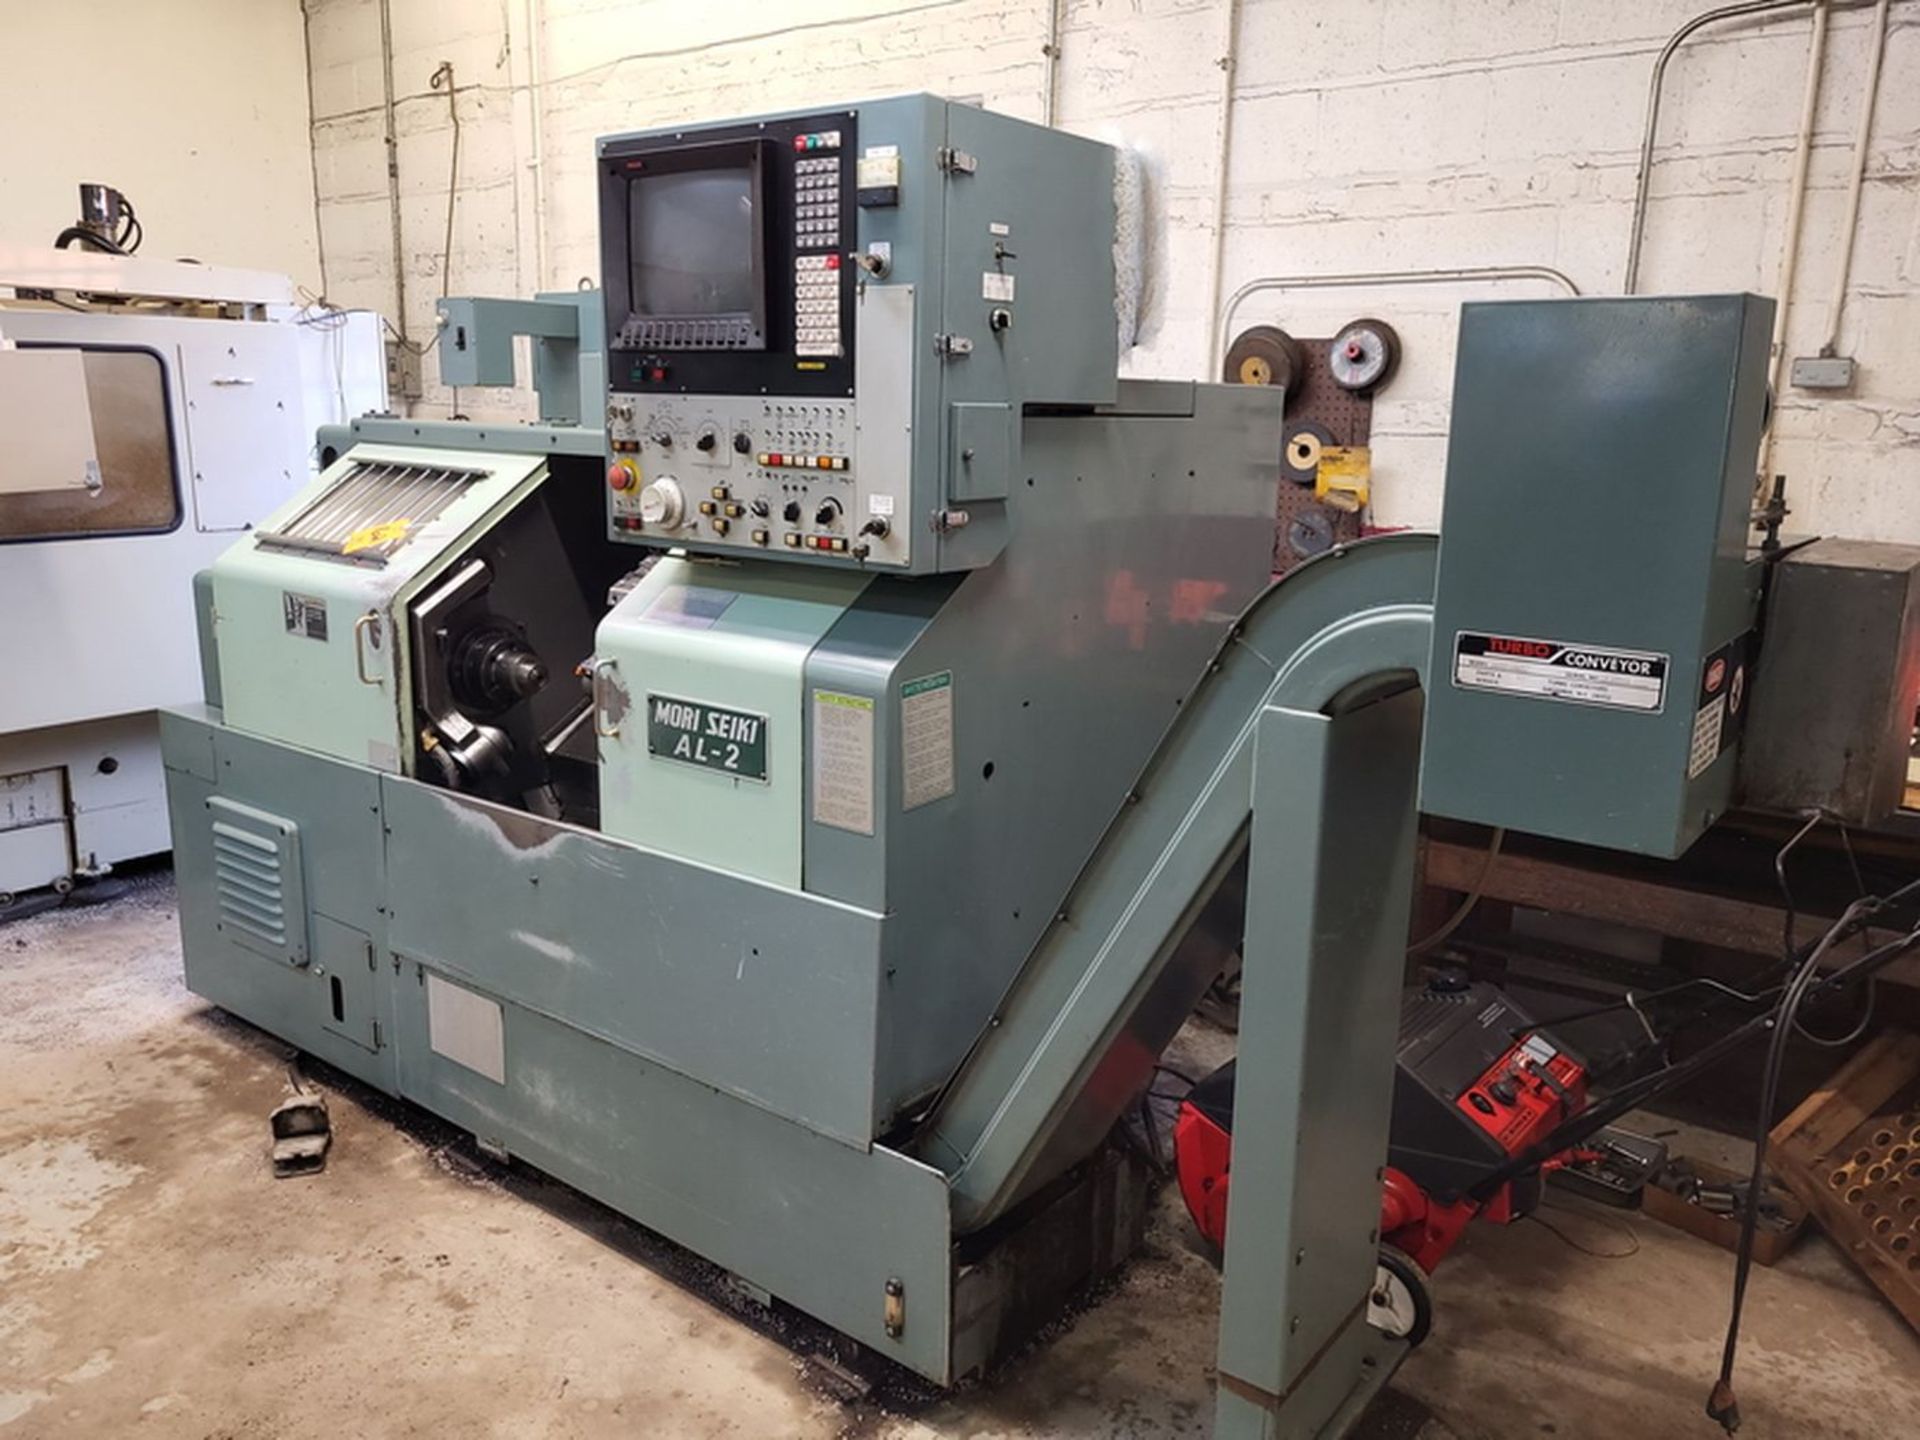 Mori Seiki Model AL-2ATM CNC Lathe, S/N: 937; with 8-Position Turret, Collet Chuck, Tool Setter, - Image 3 of 13